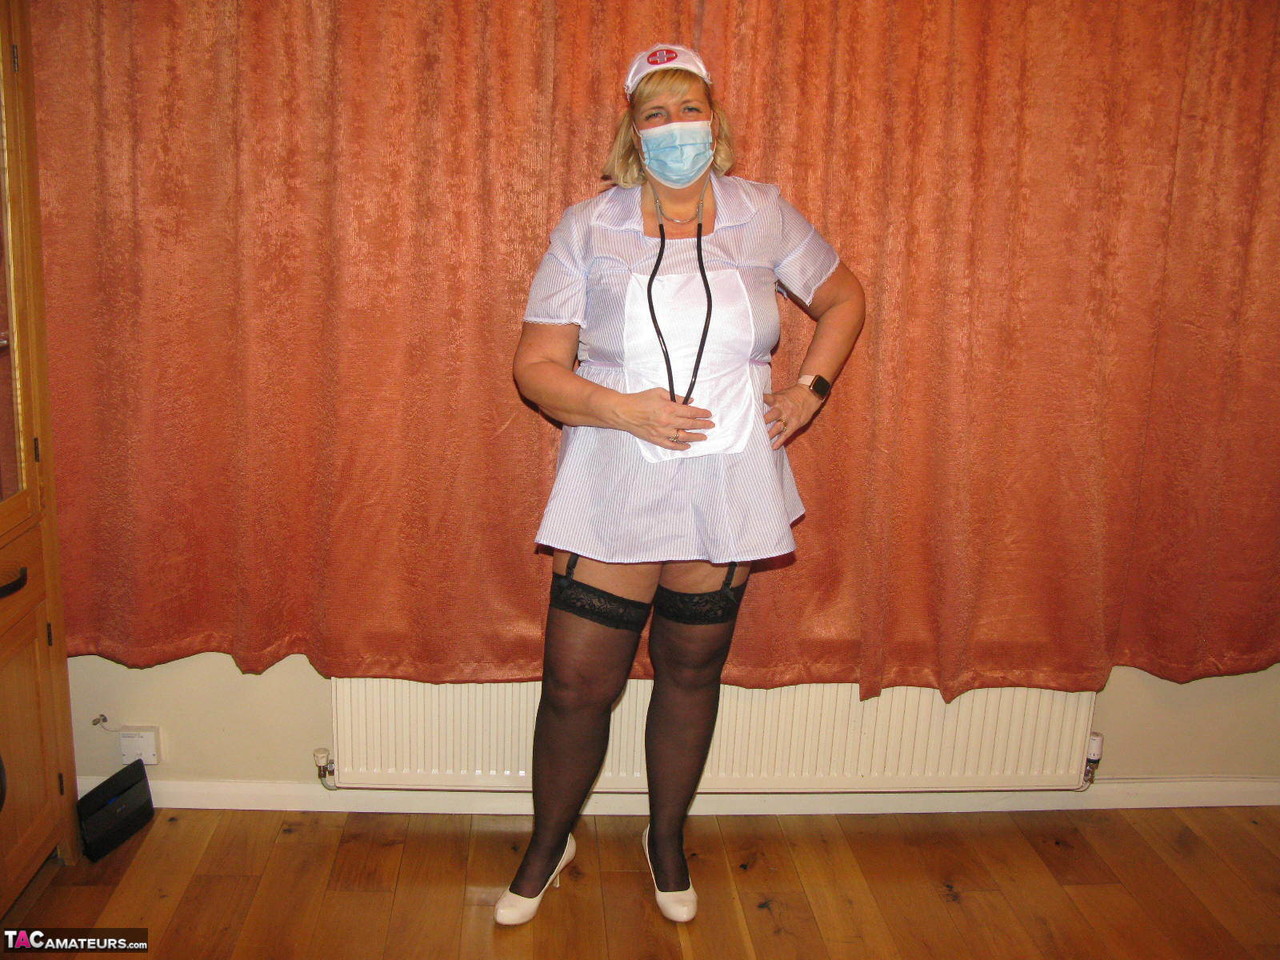 Fat nurse Chrissy Uk removes a surgical mask and uniform to model lingerie porn photo #424682137